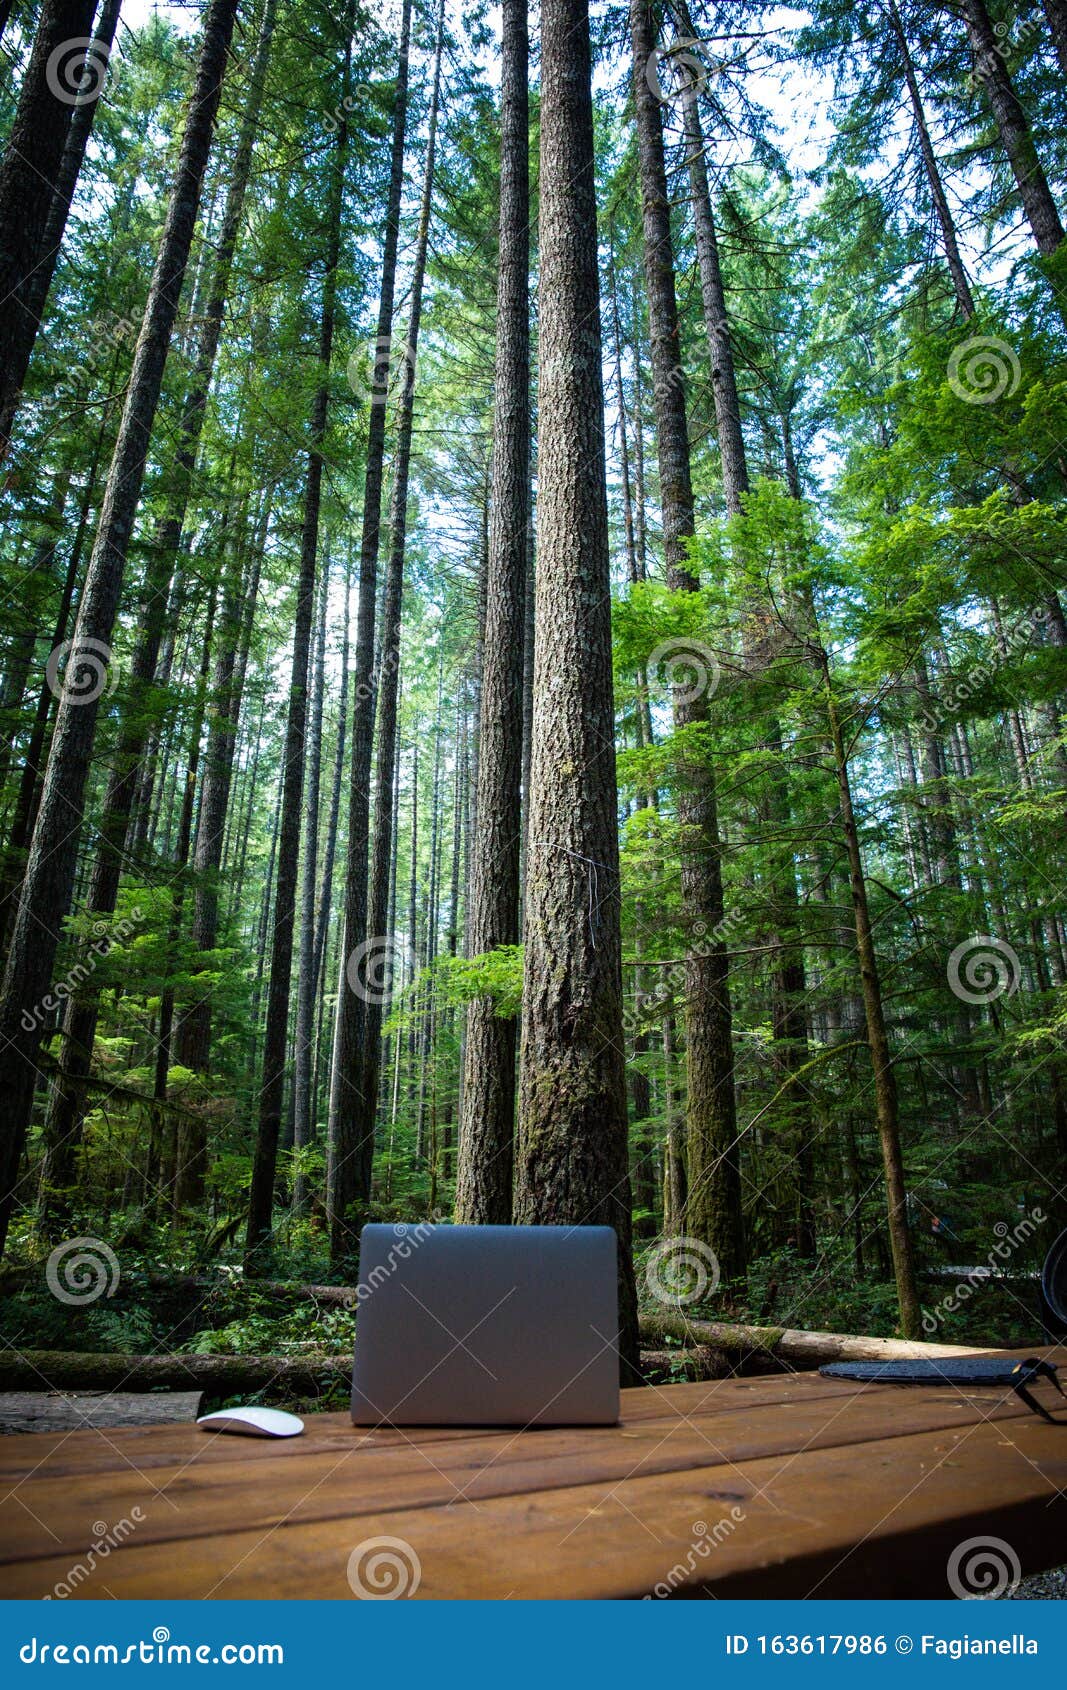 Nature Meets Technology the Workaholics; a Laptop and a on a Picnic Table in a Campground in Vancouver Island, in the Stock Photo - Image of laptop, grey: 163617986